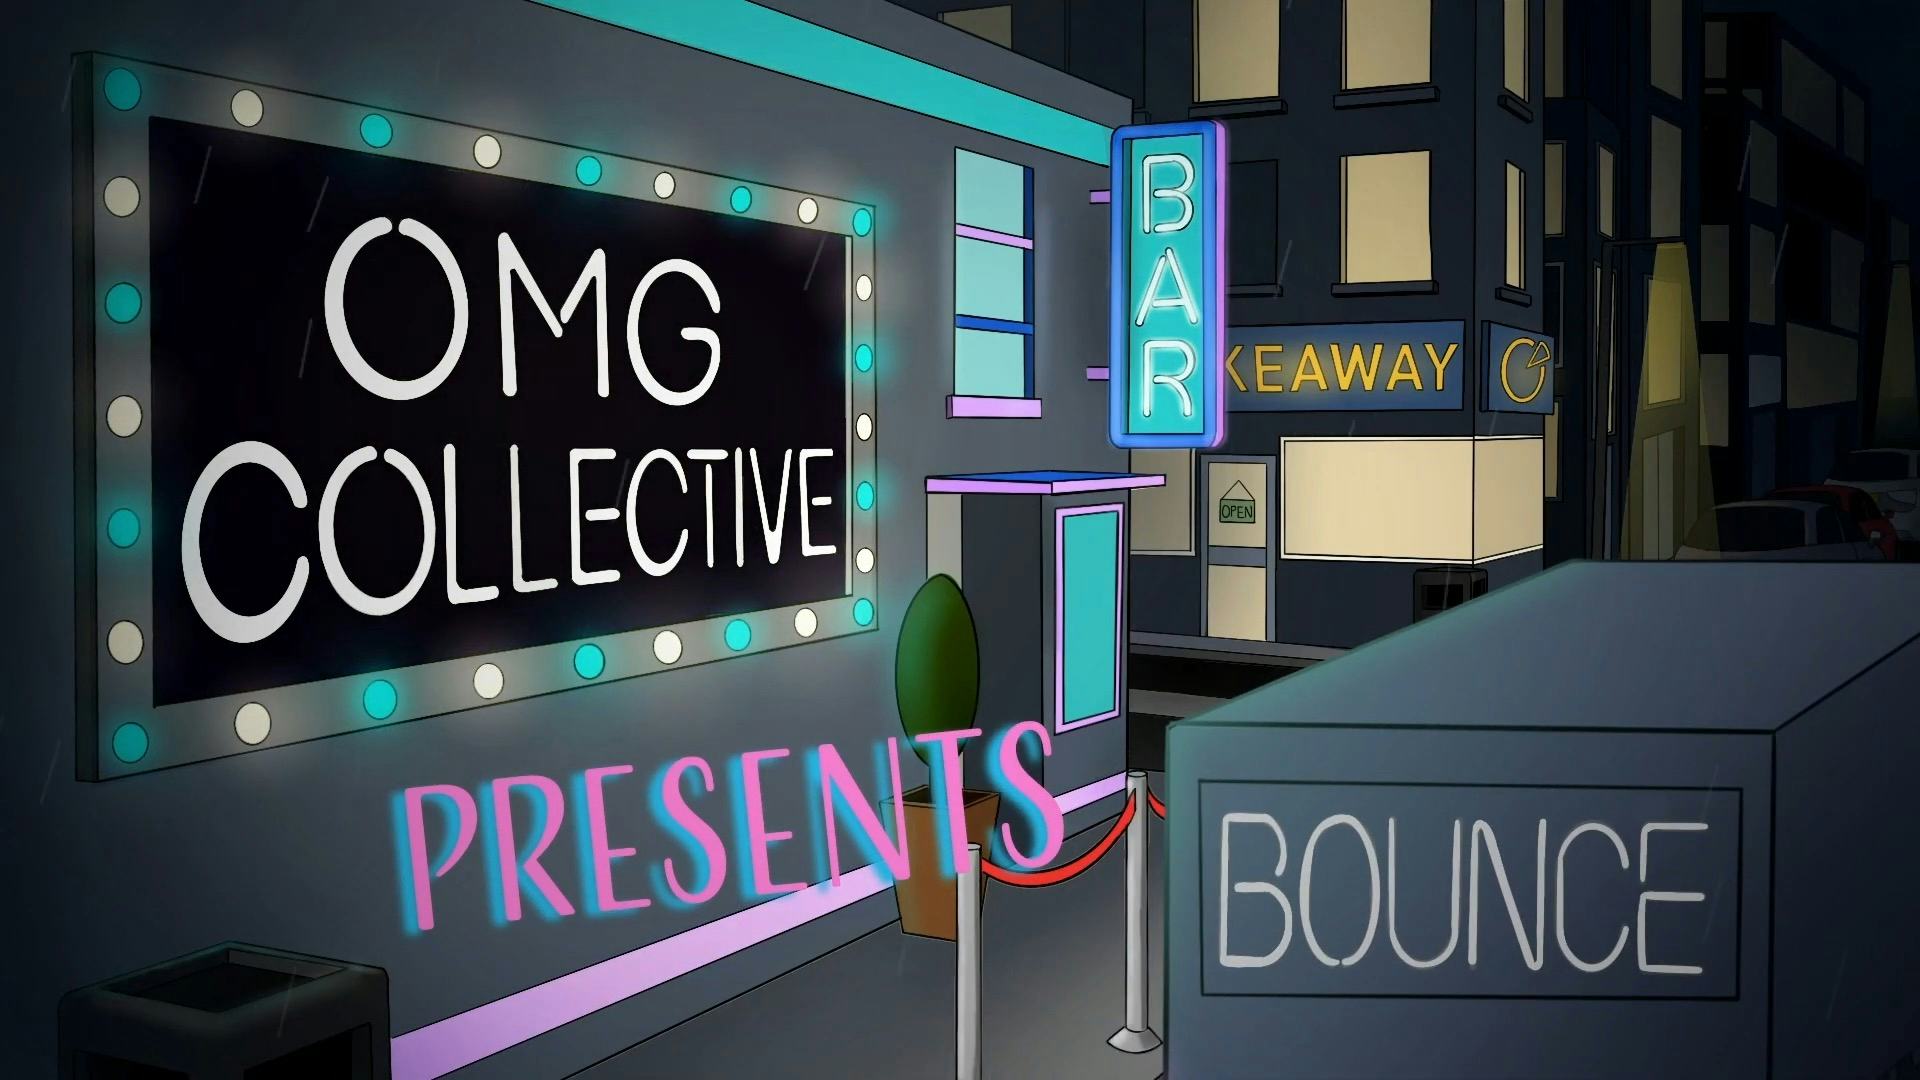 OMG Collective: "Bounce" - Official Lyric Video